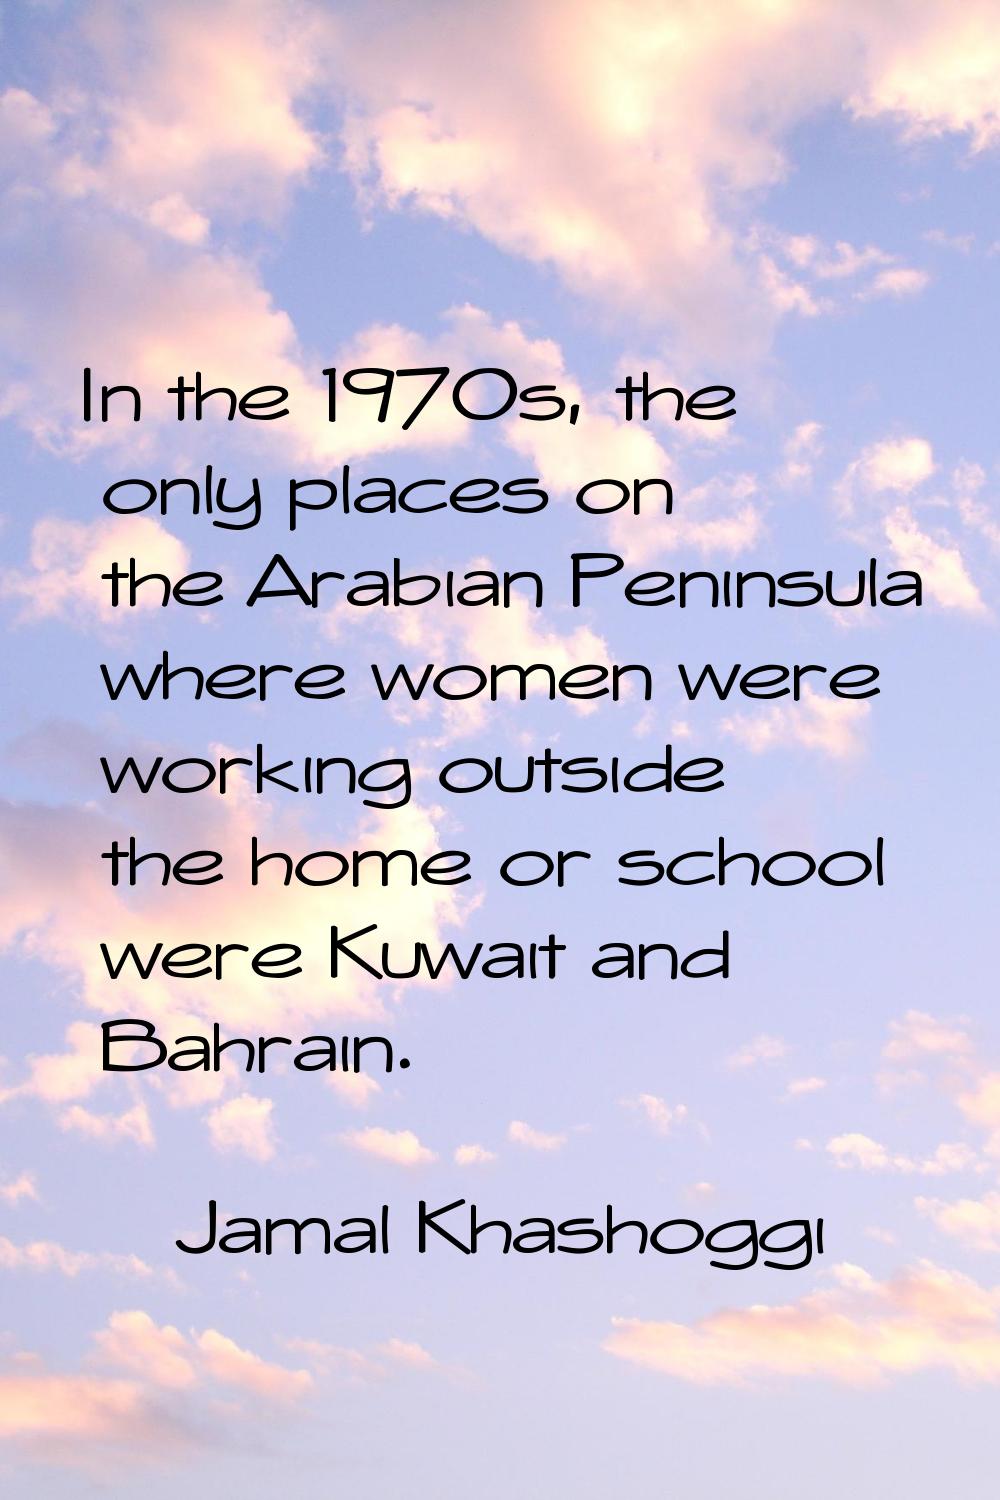 In the 1970s, the only places on the Arabian Peninsula where women were working outside the home or